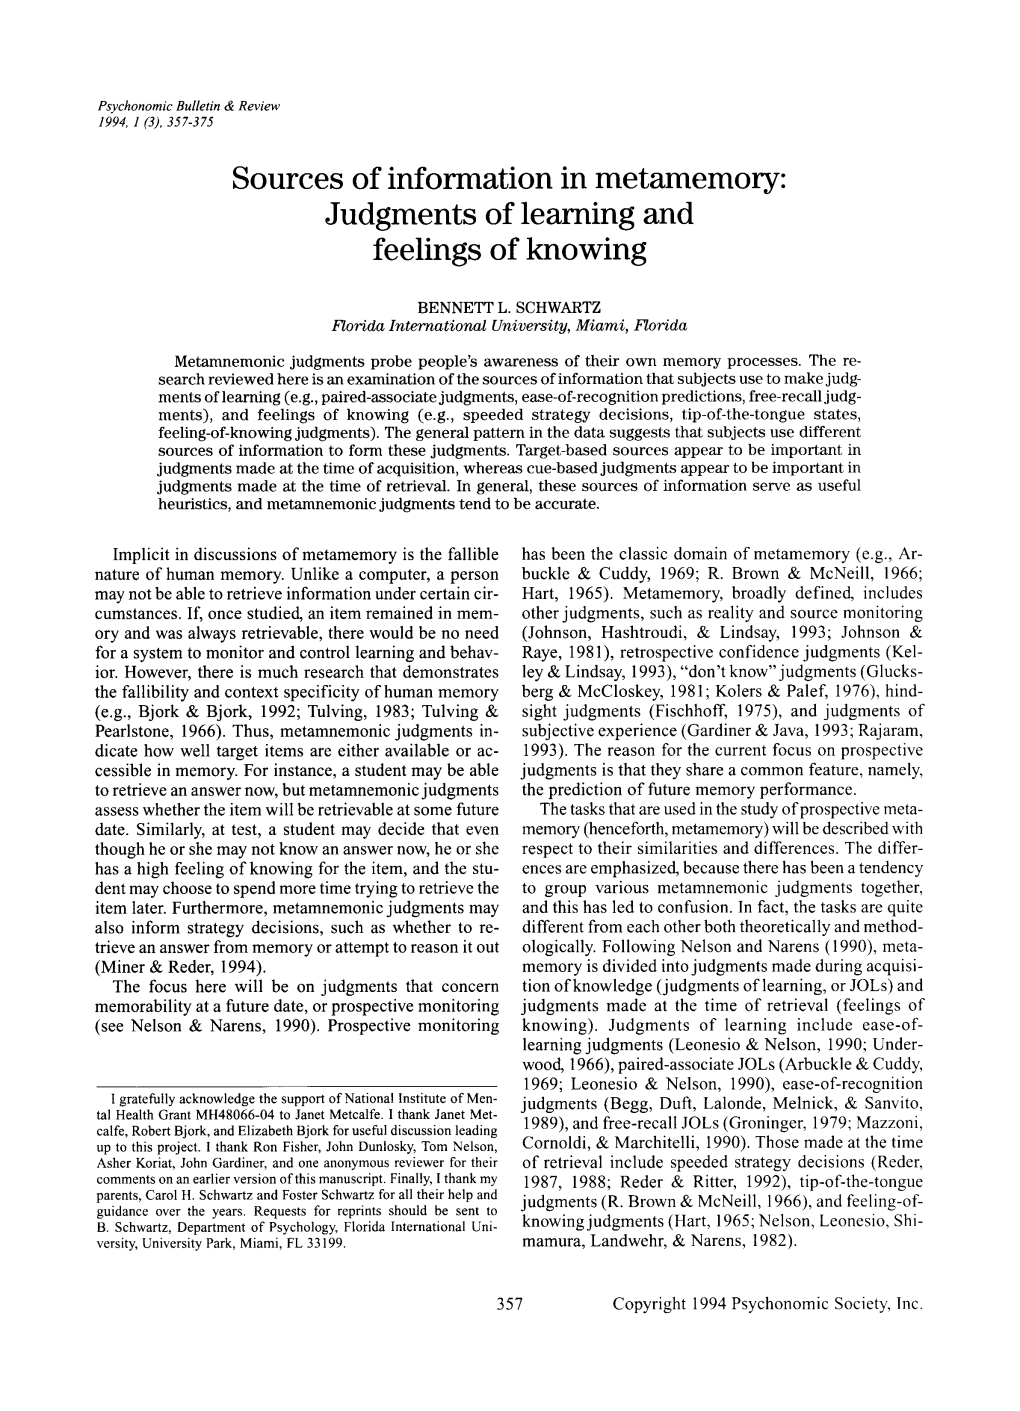 Sources of Information in Metamemory: Judgments of Learning and Feelings of Knowing